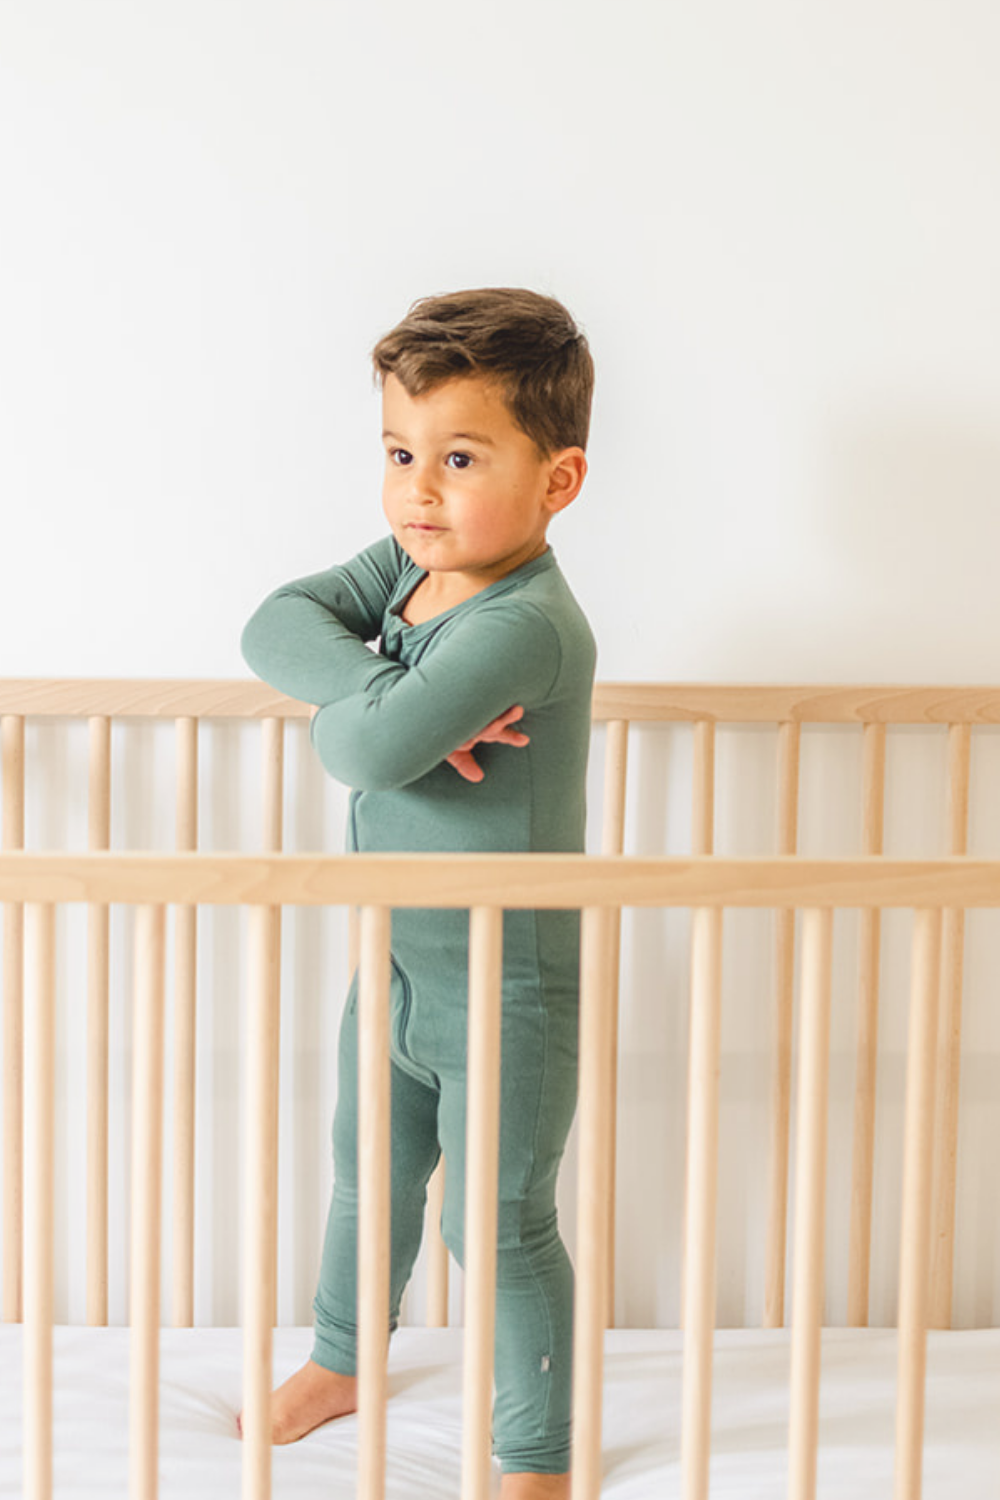 Toddler standing in his crib protesting his nap.